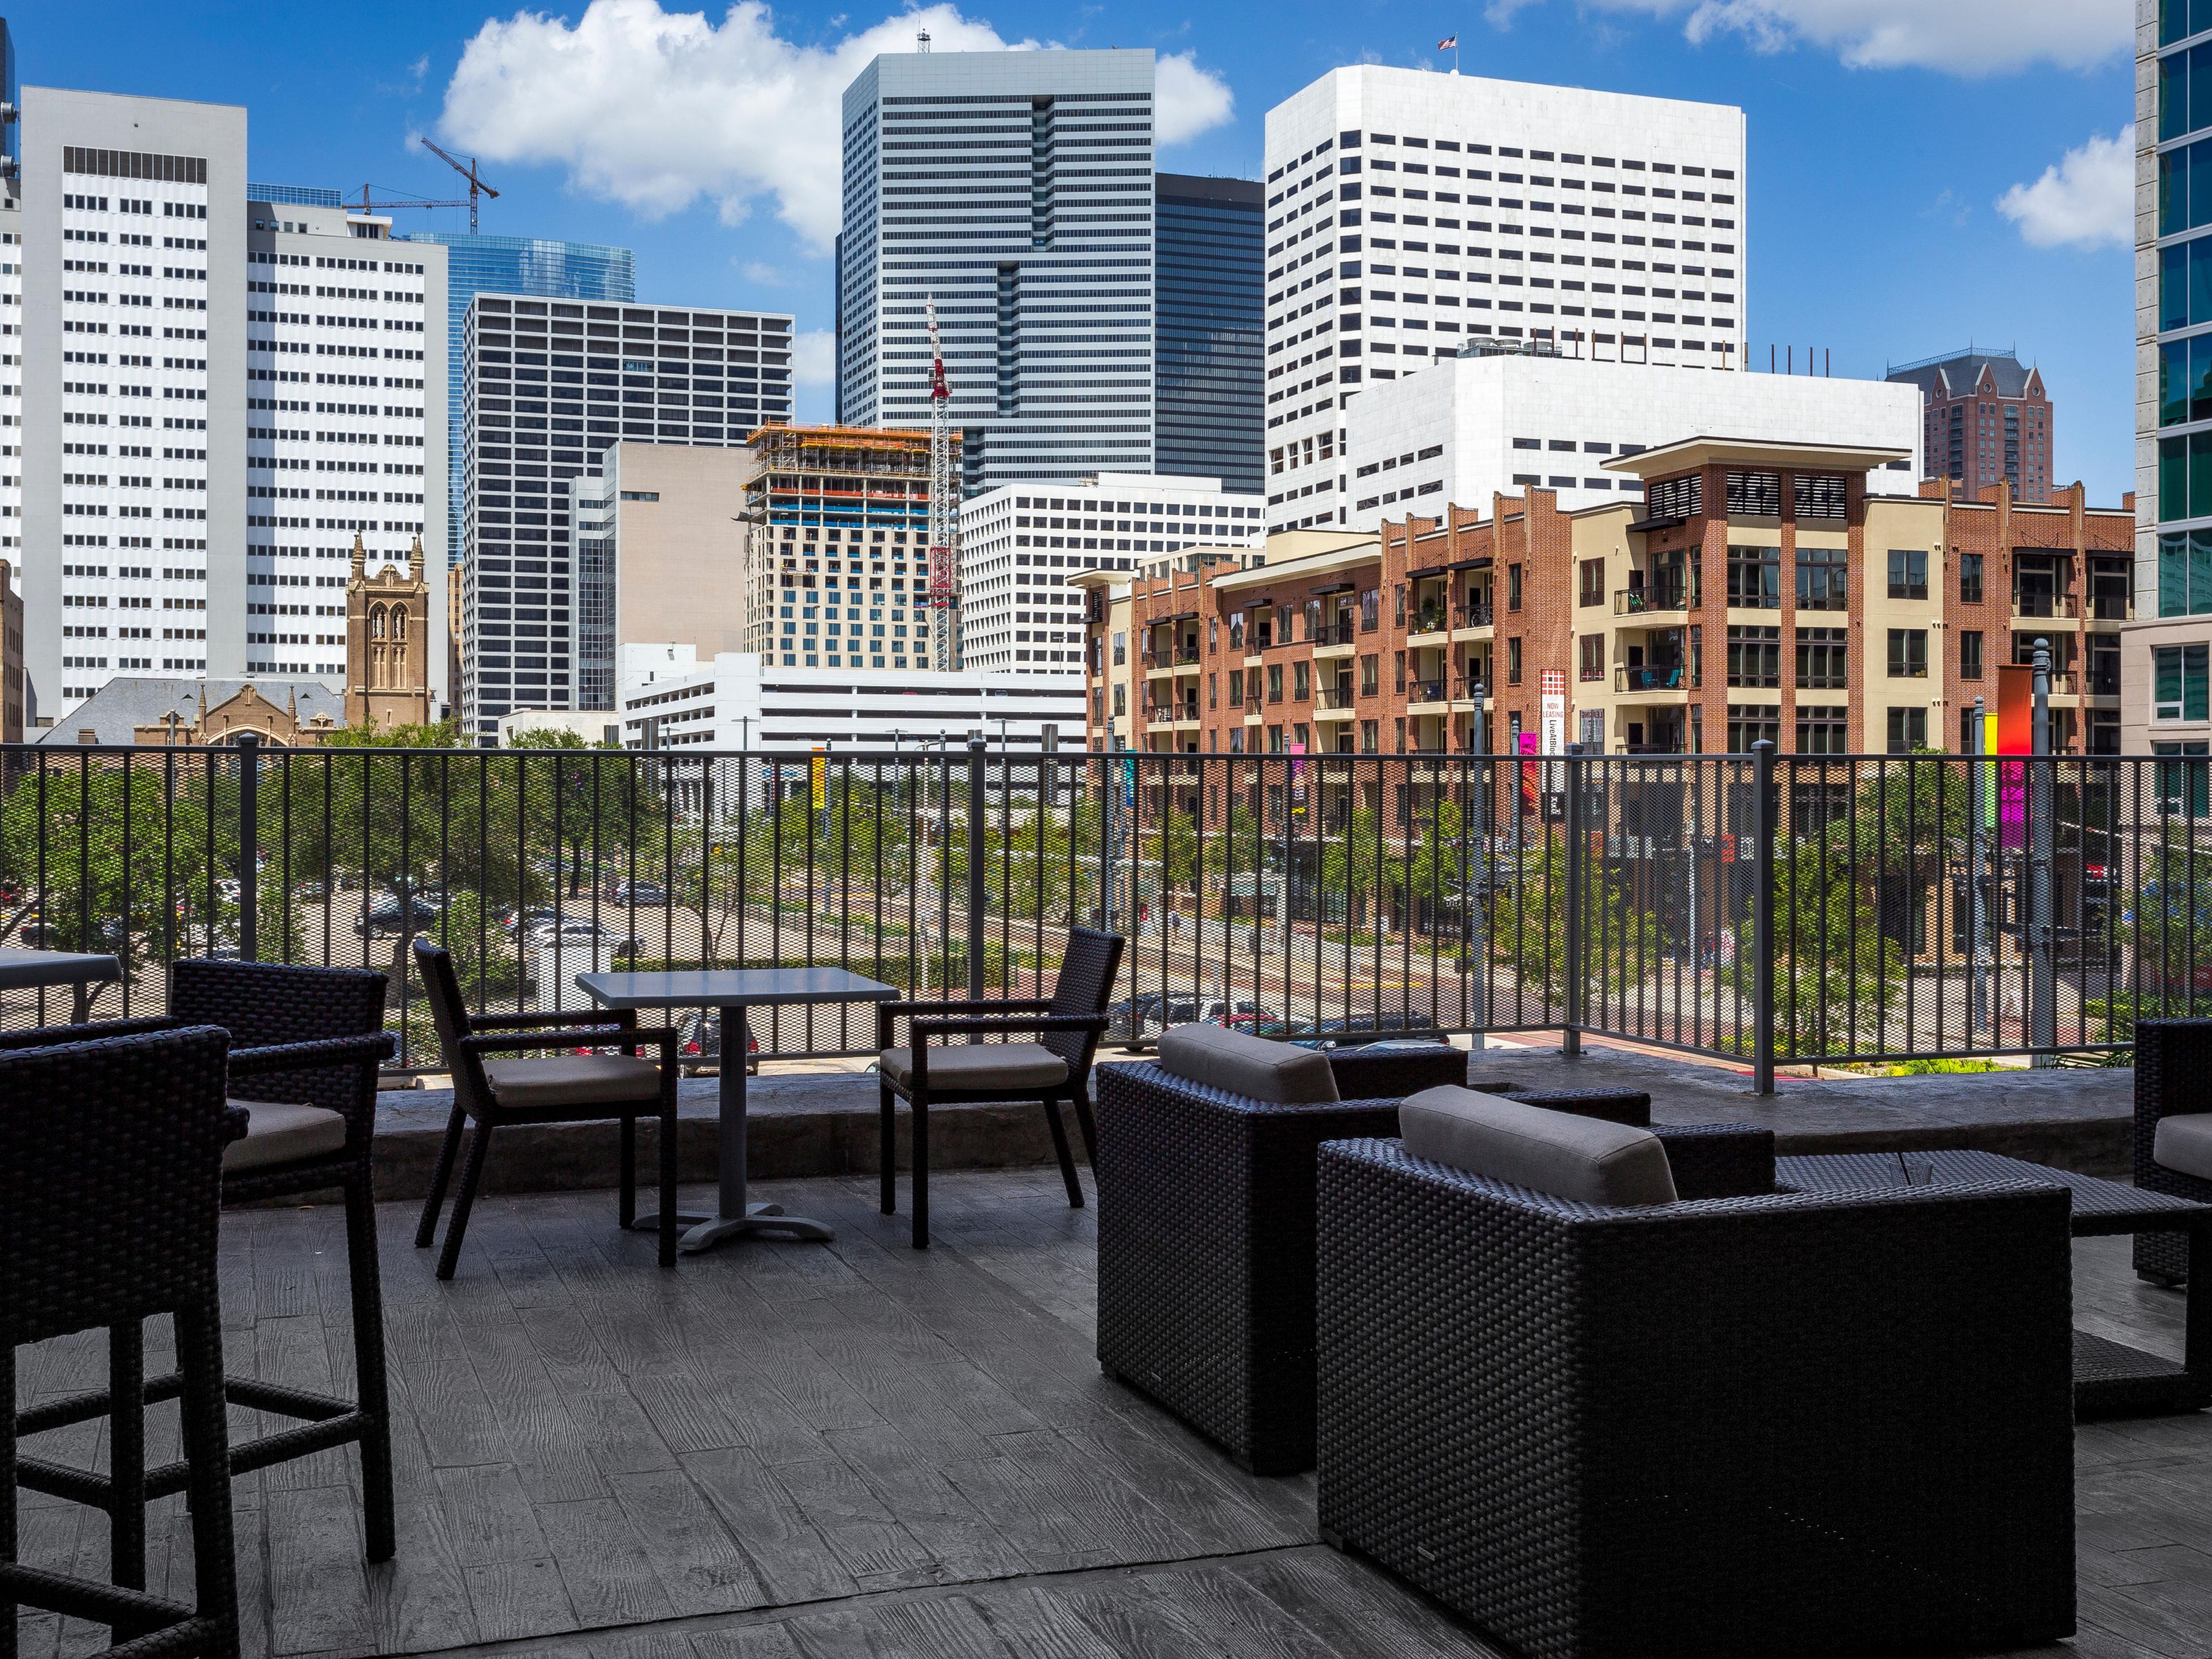 A great minimalist wedding option with gorgeous panoramic views of downtown Houston skyline. Our budget friendly option will not disappoint! Discounted room blocks, catering and bar service are available. Contact our team to take a tour and plan your event today! 